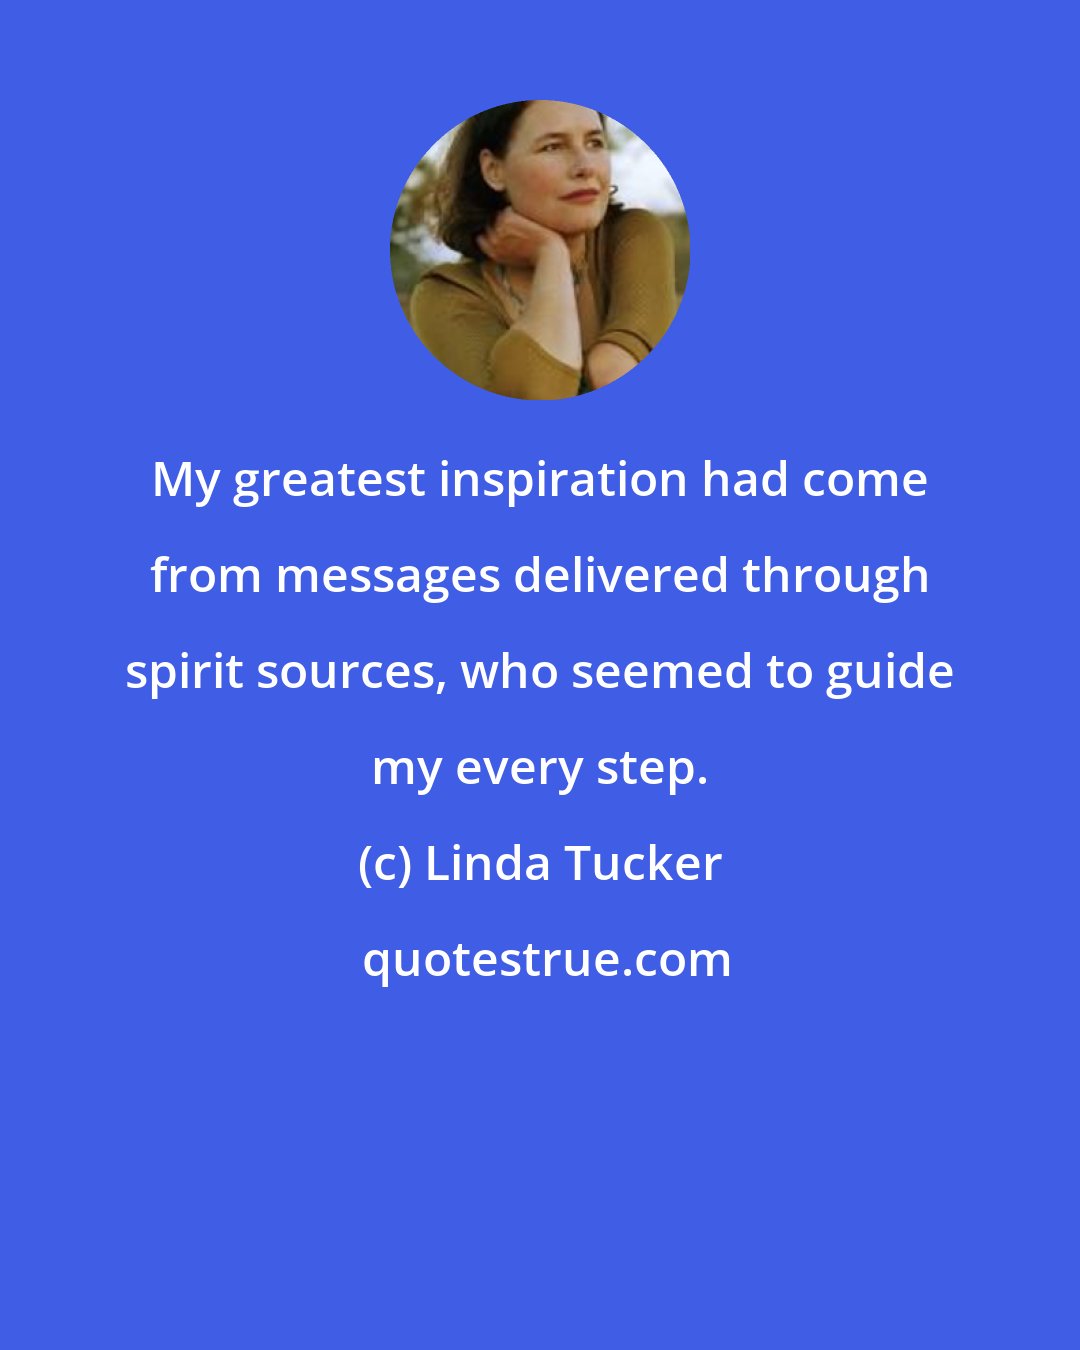 Linda Tucker: My greatest inspiration had come from messages delivered through spirit sources, who seemed to guide my every step.